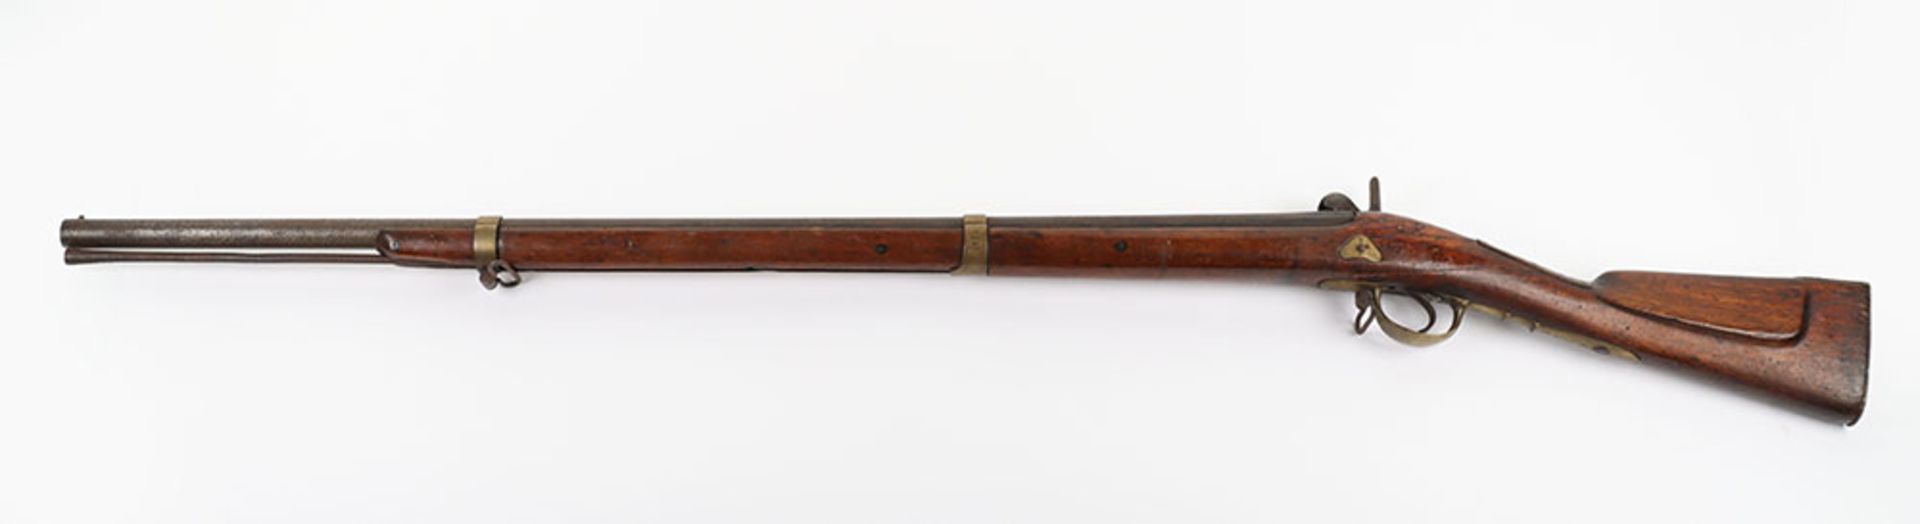 14-Bore Russian Back Action Military Musket - Image 16 of 17